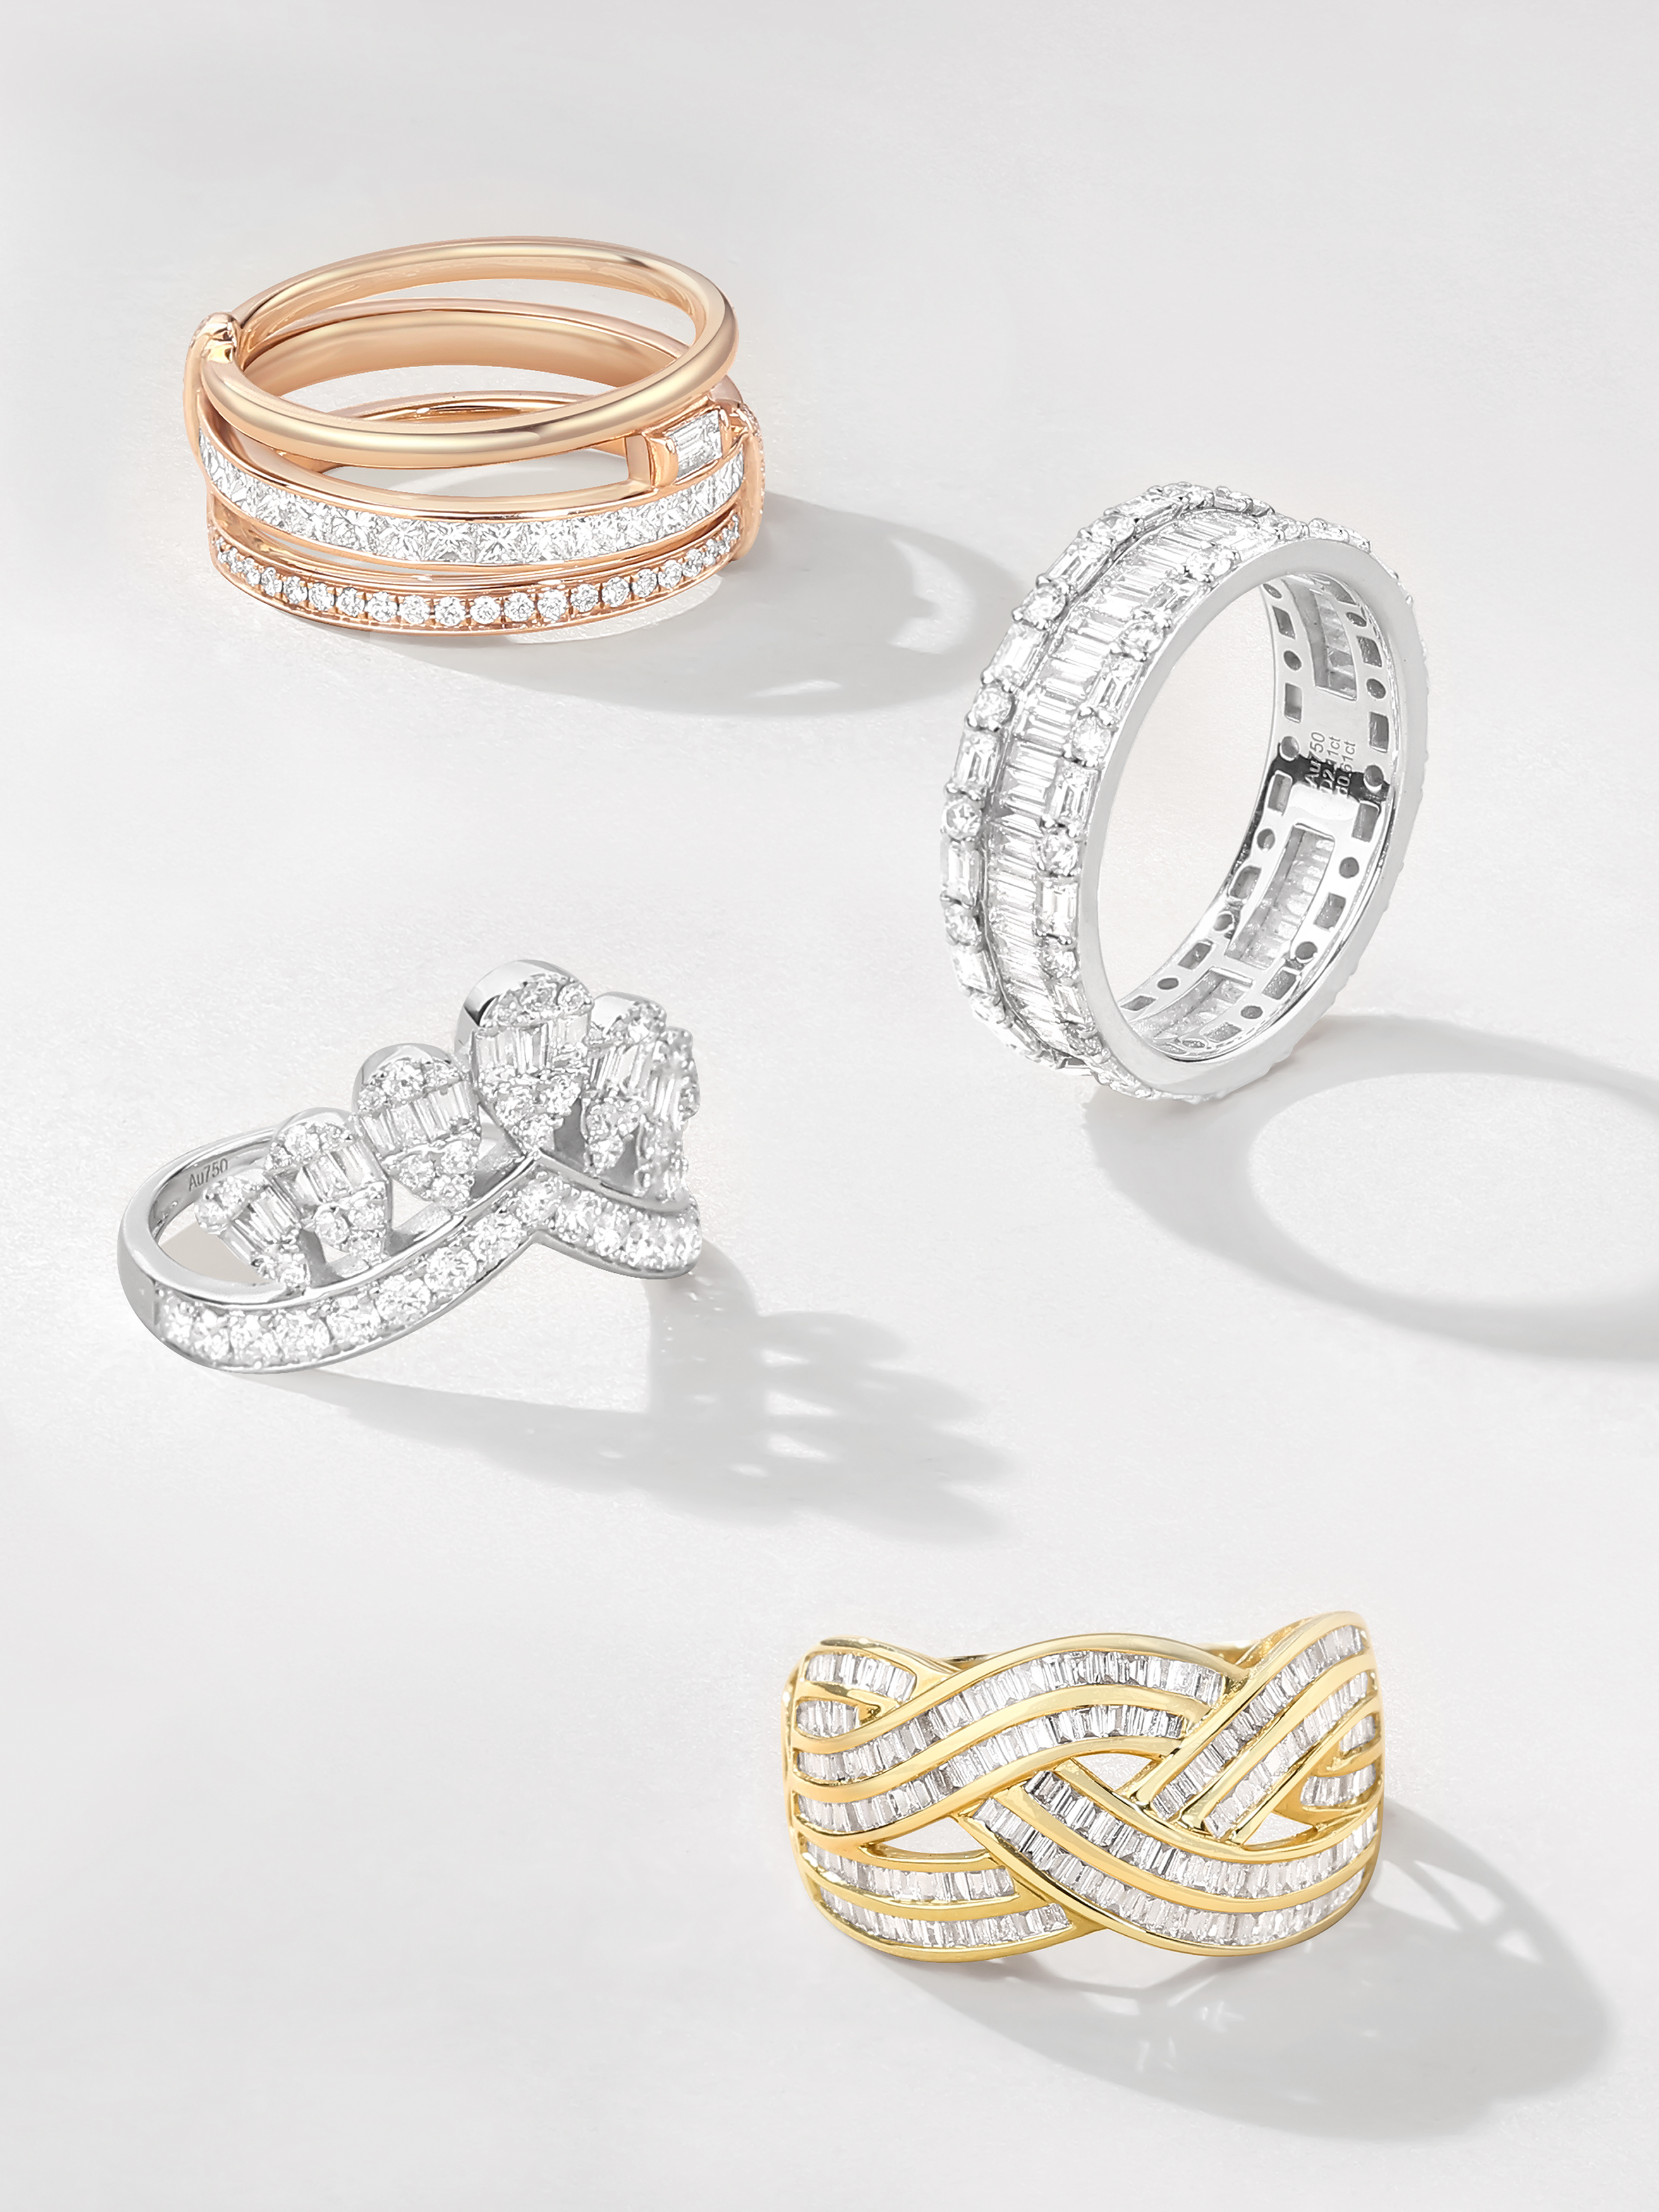 Unique and Exquisite: POYAS Jewelry's One-Stop Solution for Colored Diamond Rings